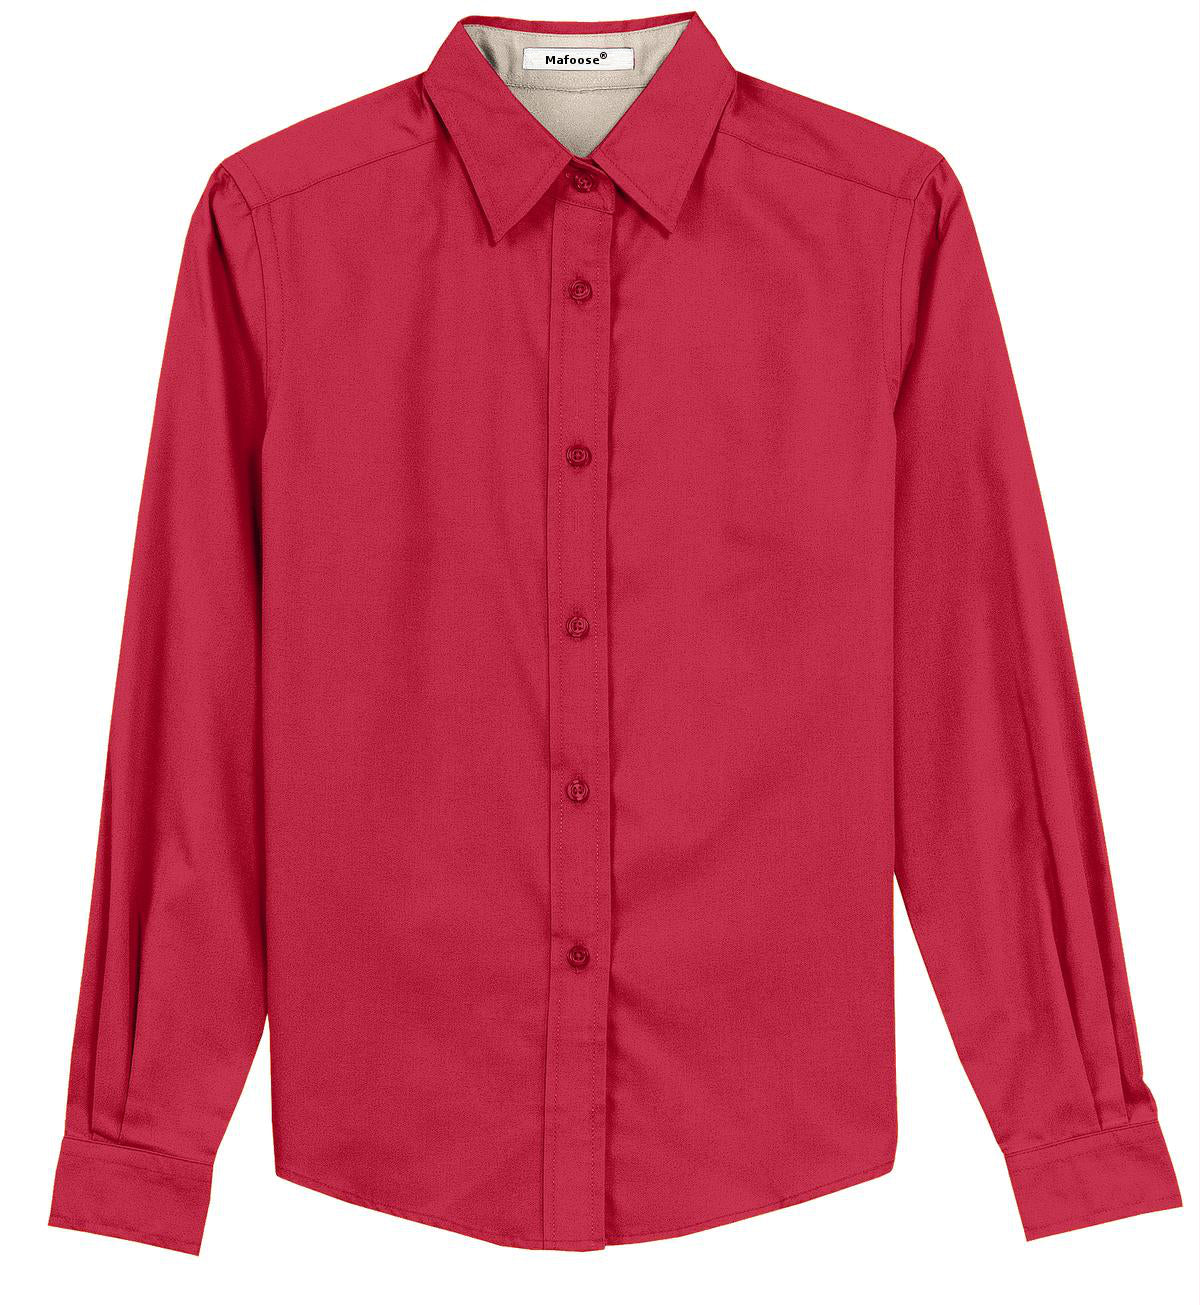 Mafoose Women's Long Sleeve Easy Care Shirt Red/Light Stone-Front